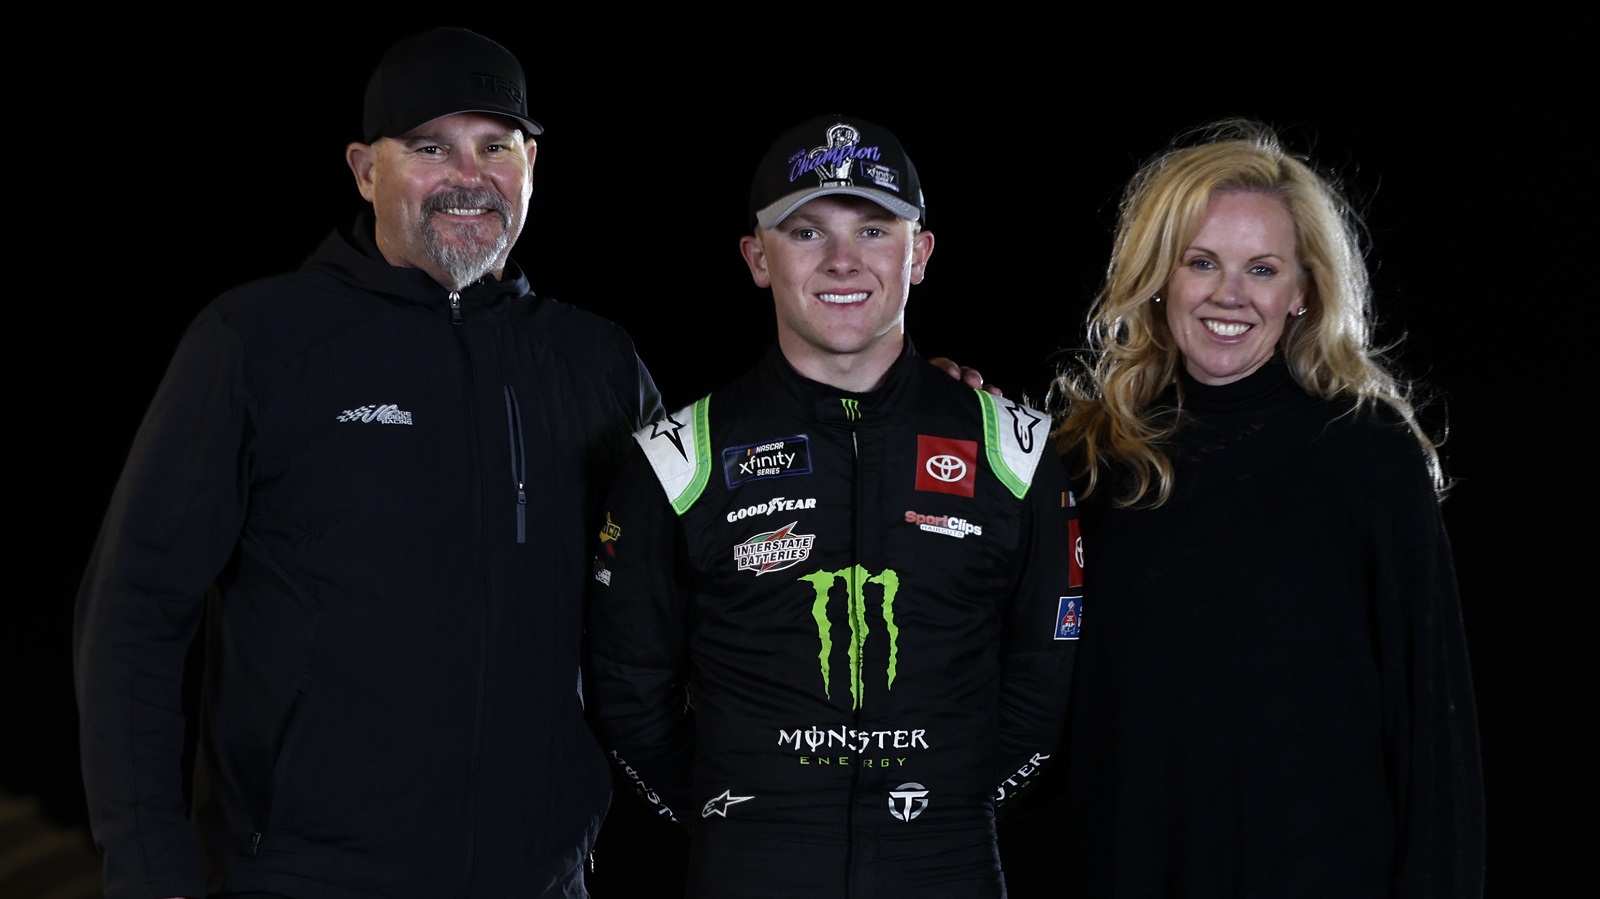 Ty Gibbs poses with his father, Coy Gibbs and mother, Heather Gibbs after winning the NASCAR Xfinity Series championship at Phoenix Raceway on Nov. 5, 2022. | Meg Oliphant/Getty Images